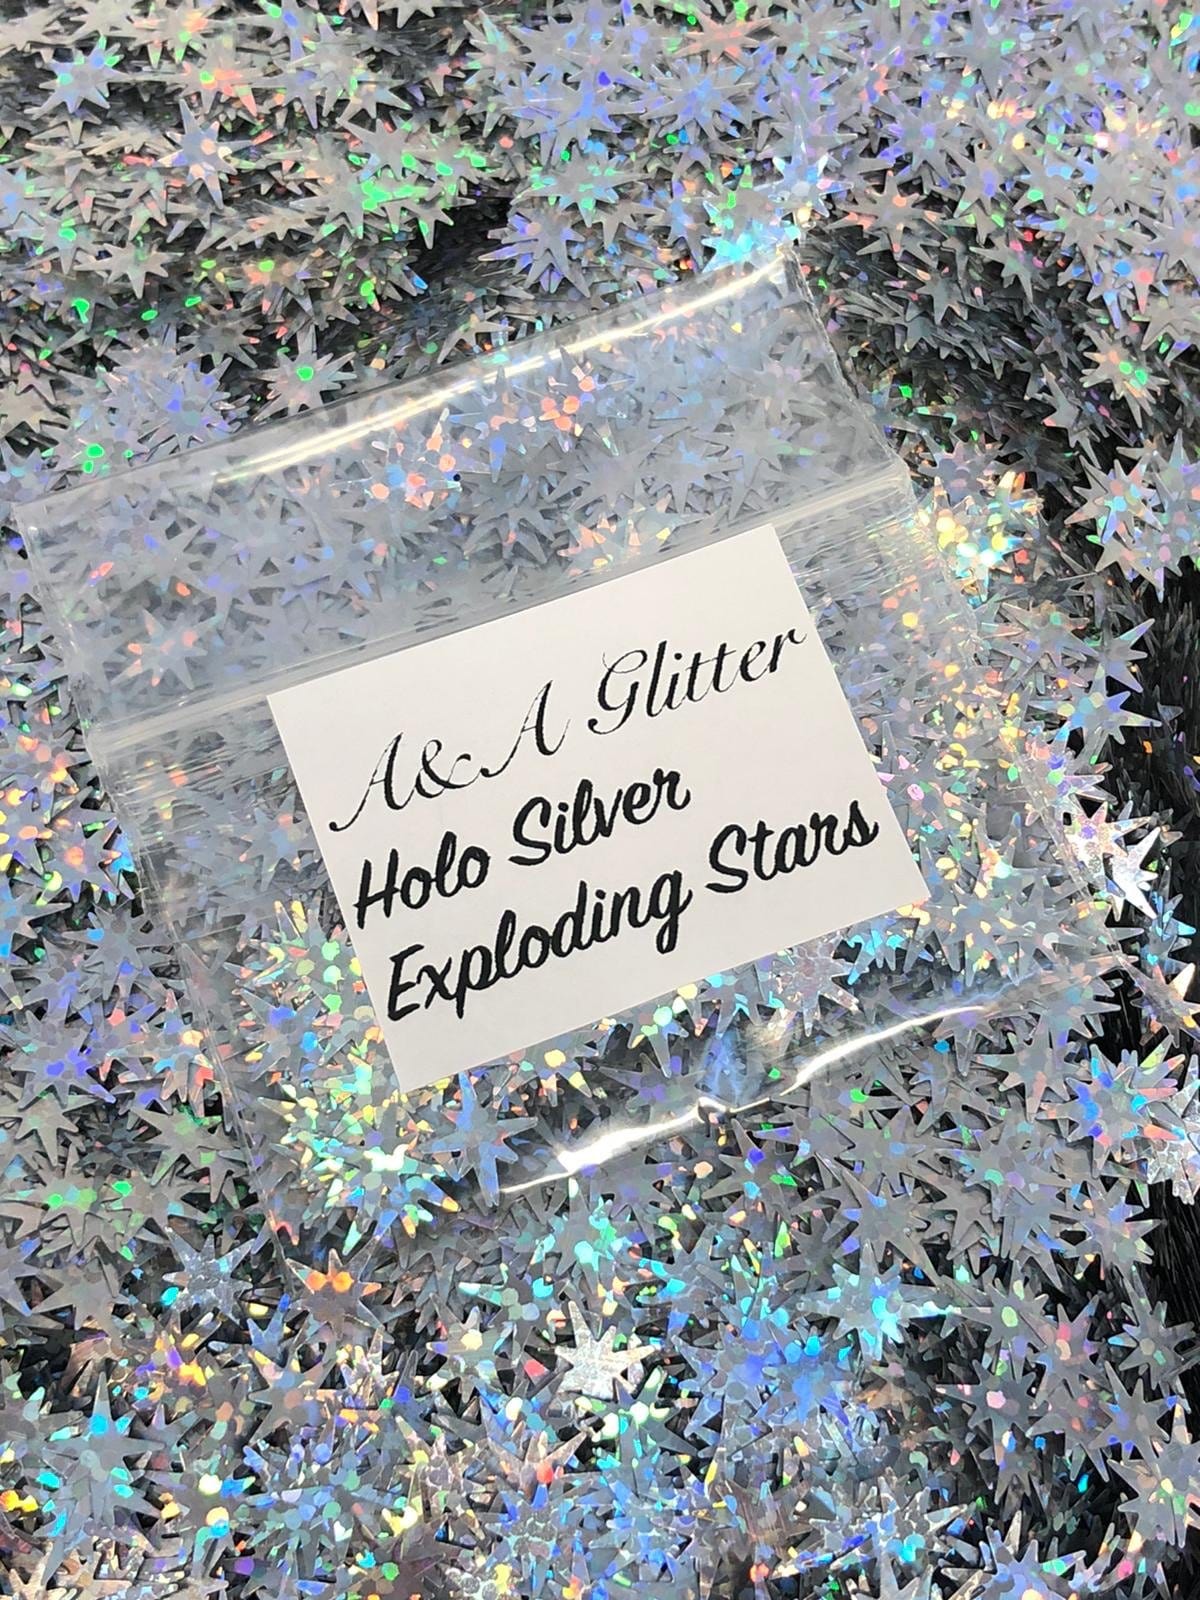 Holo Silver Exploding Stars